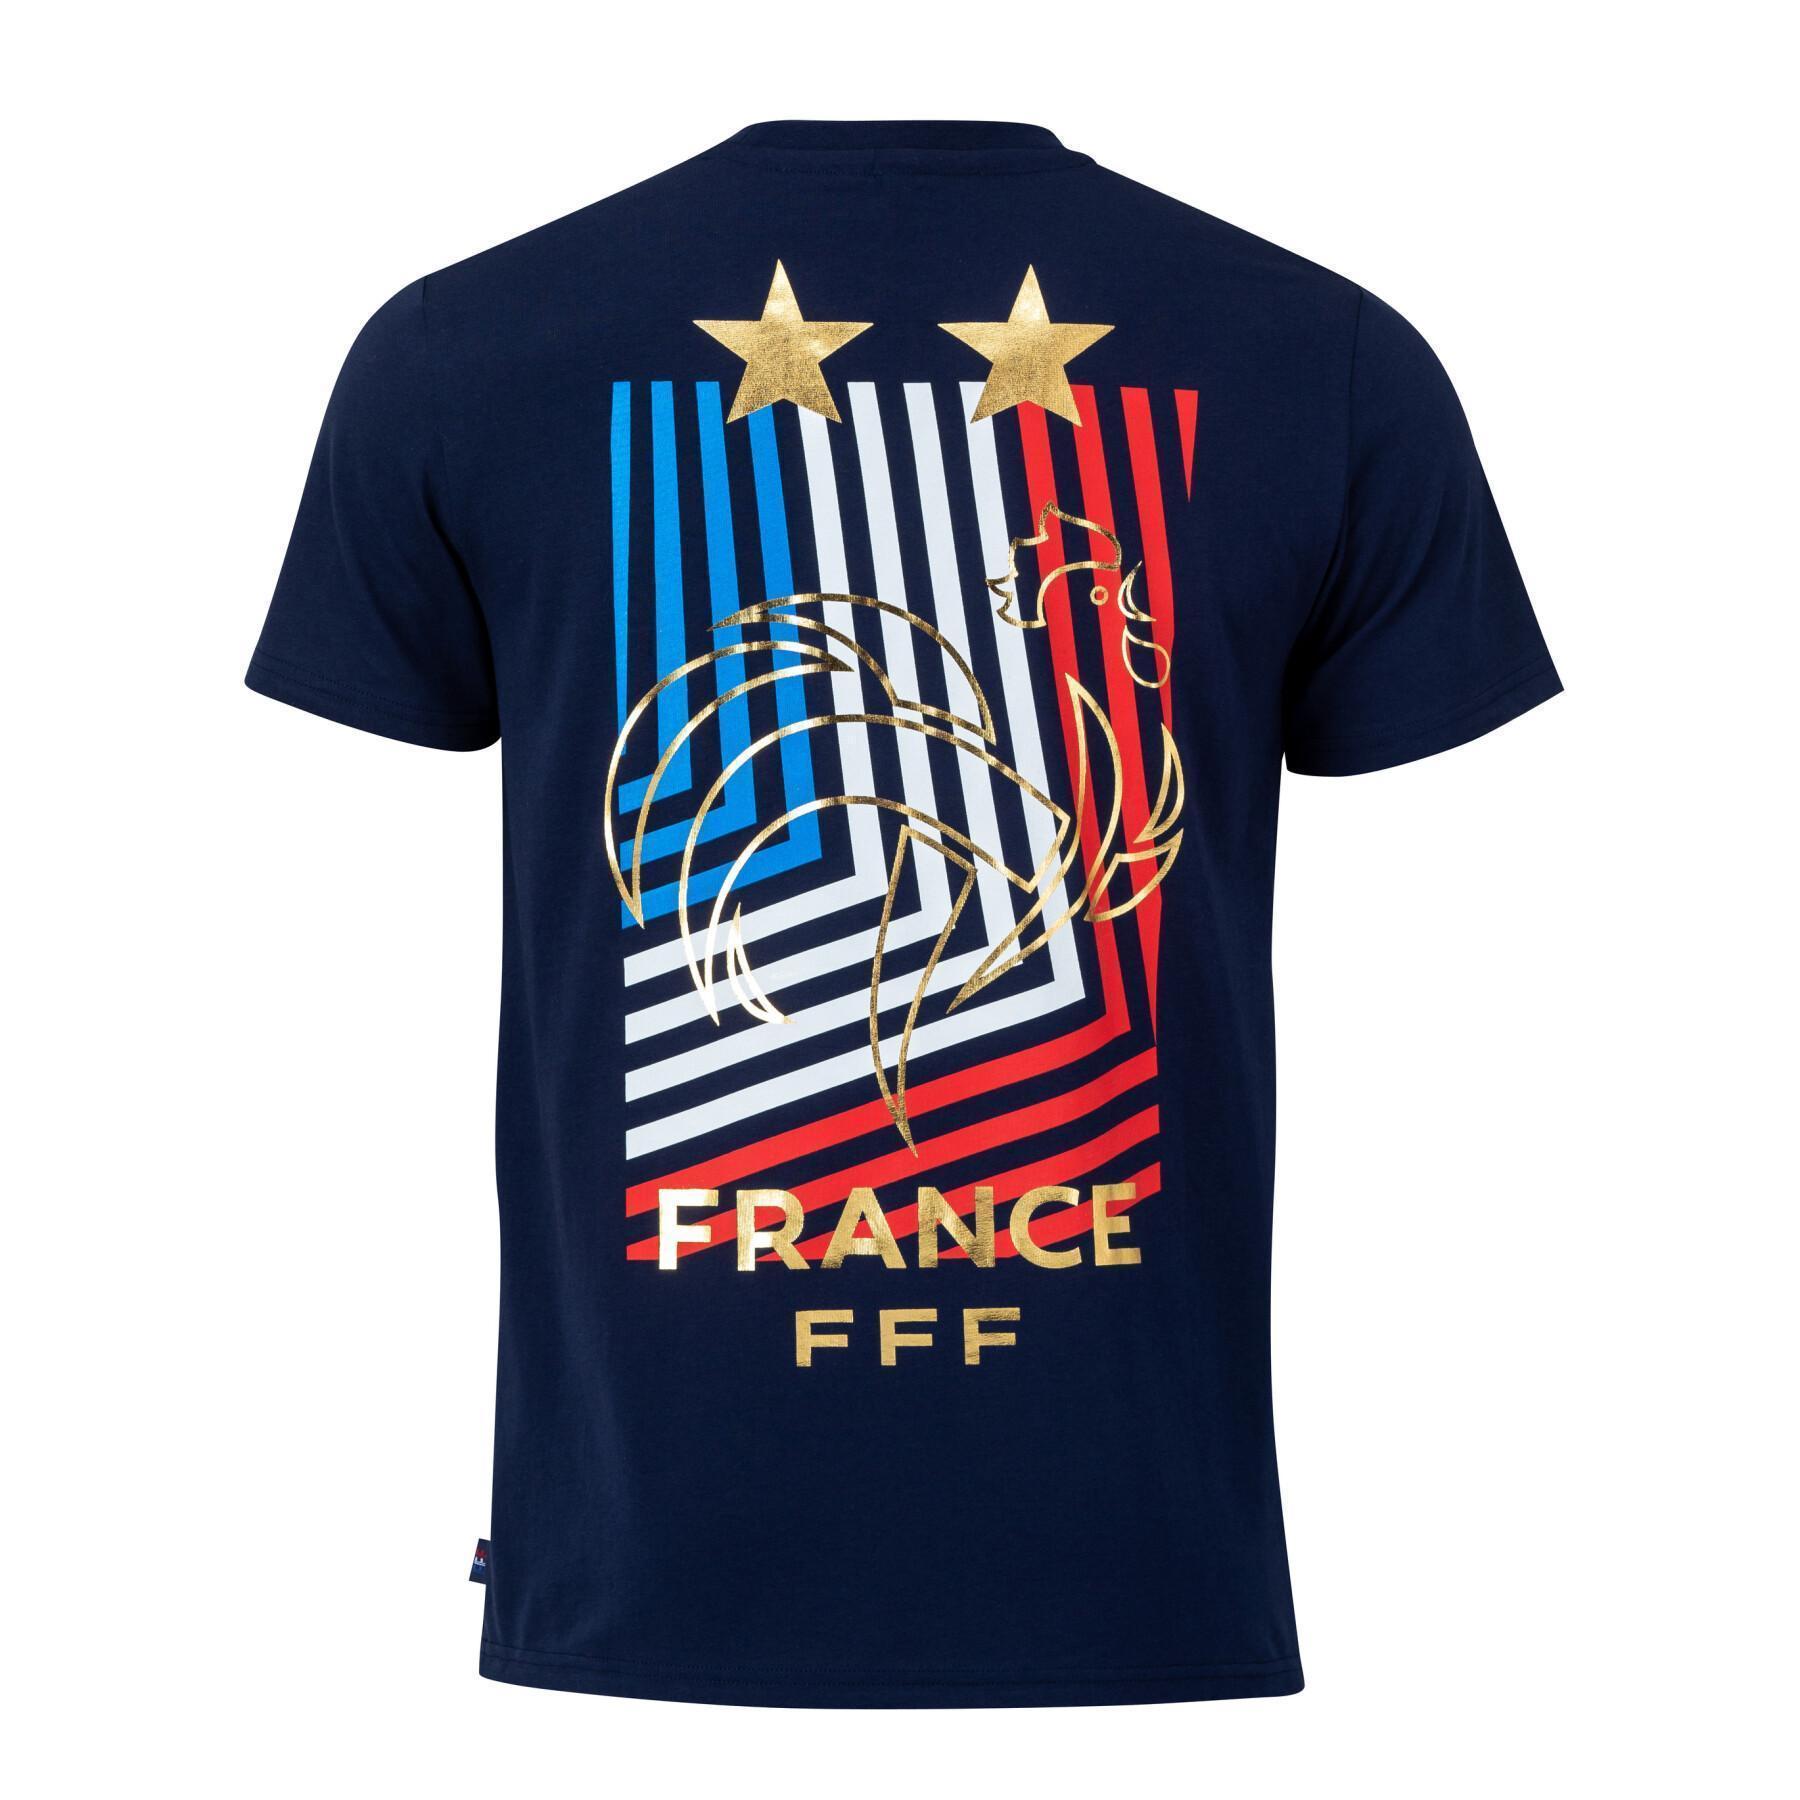 Team T-shirt from France 2022/23 Graphic